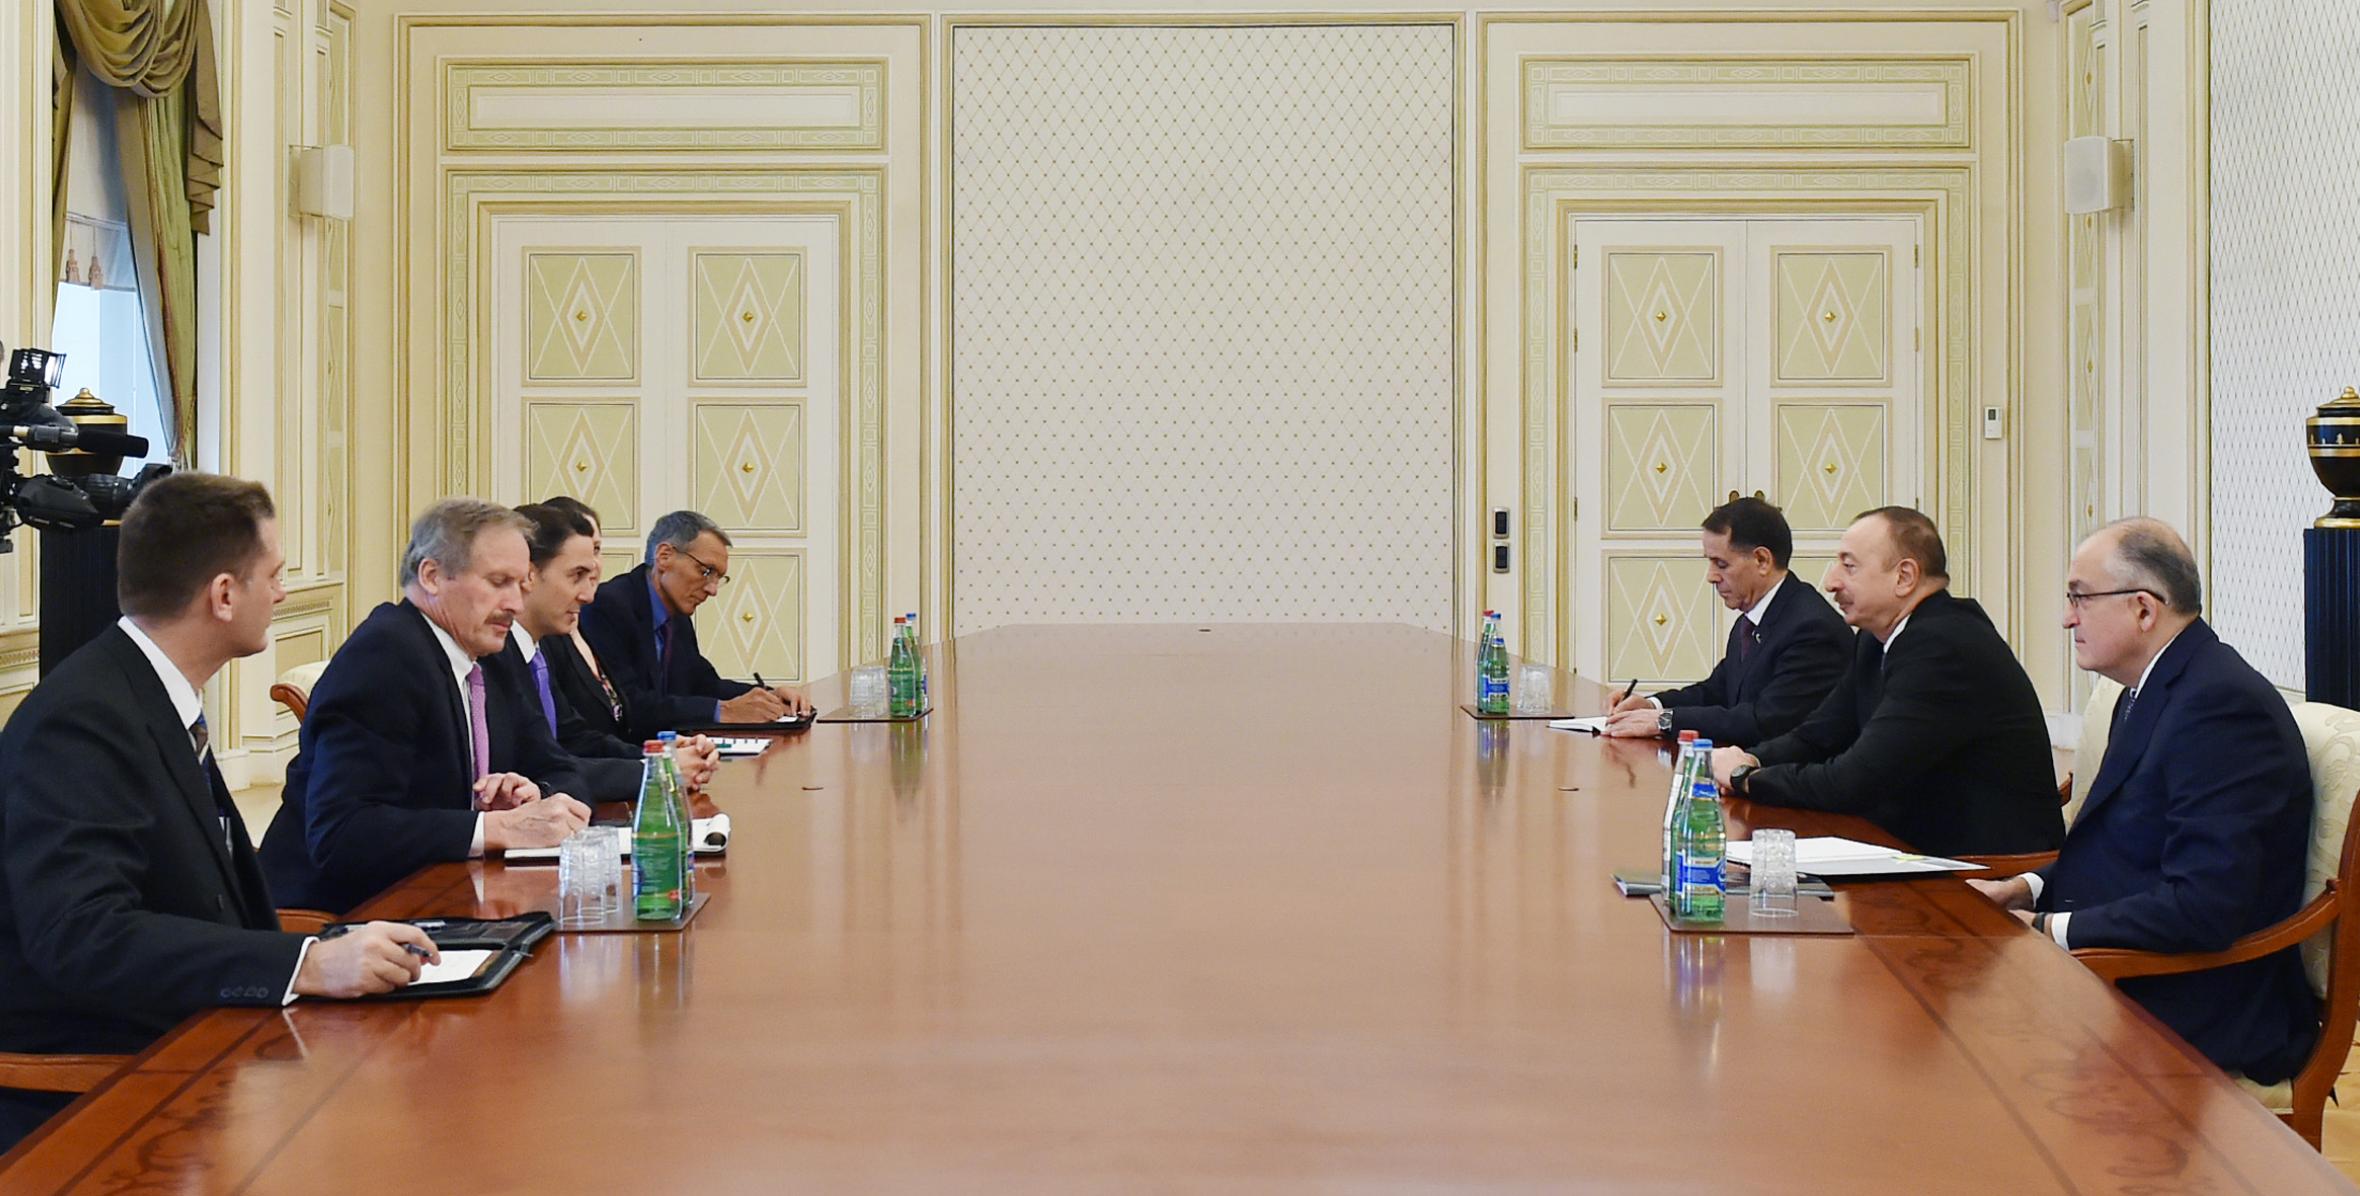 Ilham Aliyev received a delegation led by the US Special Envoy and Coordinator for International Energy Affairs